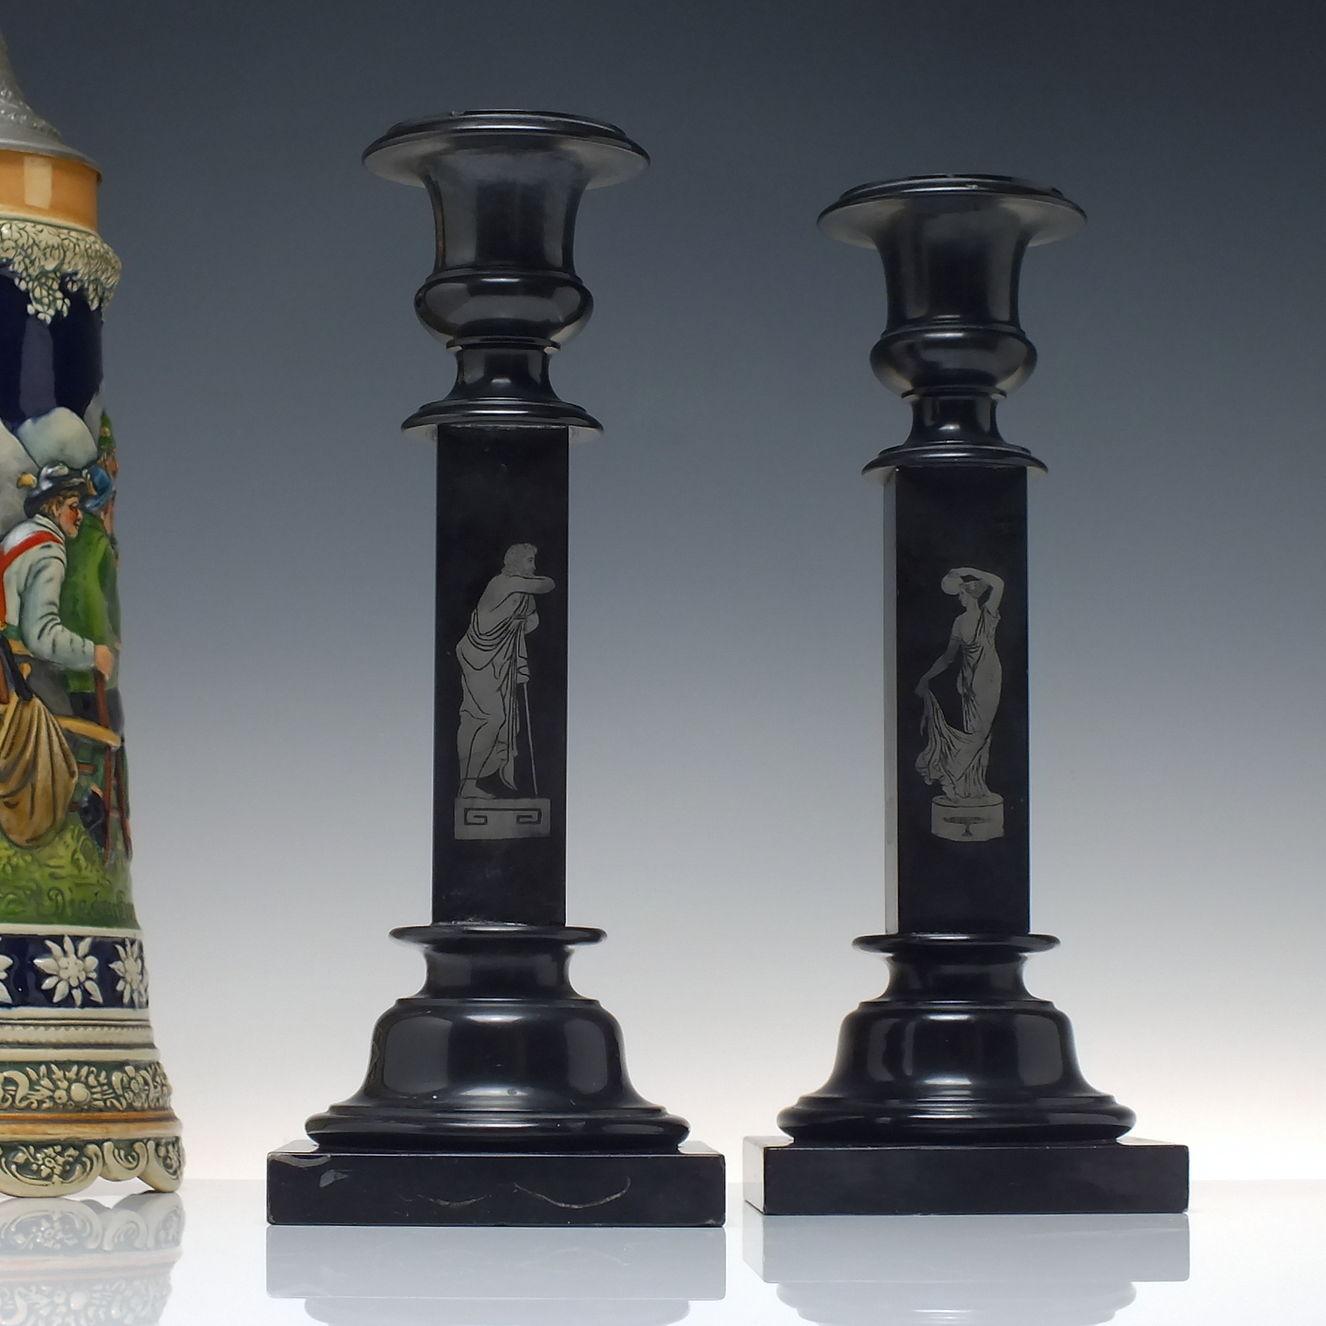 Technical Description 

A rare pair of Ashford Black Marble candlesticks produced in the mid 19th century in Derbyshire. Each candlestick has a different set of four etched classical figures.

You can find some excellent inlaid and engraved